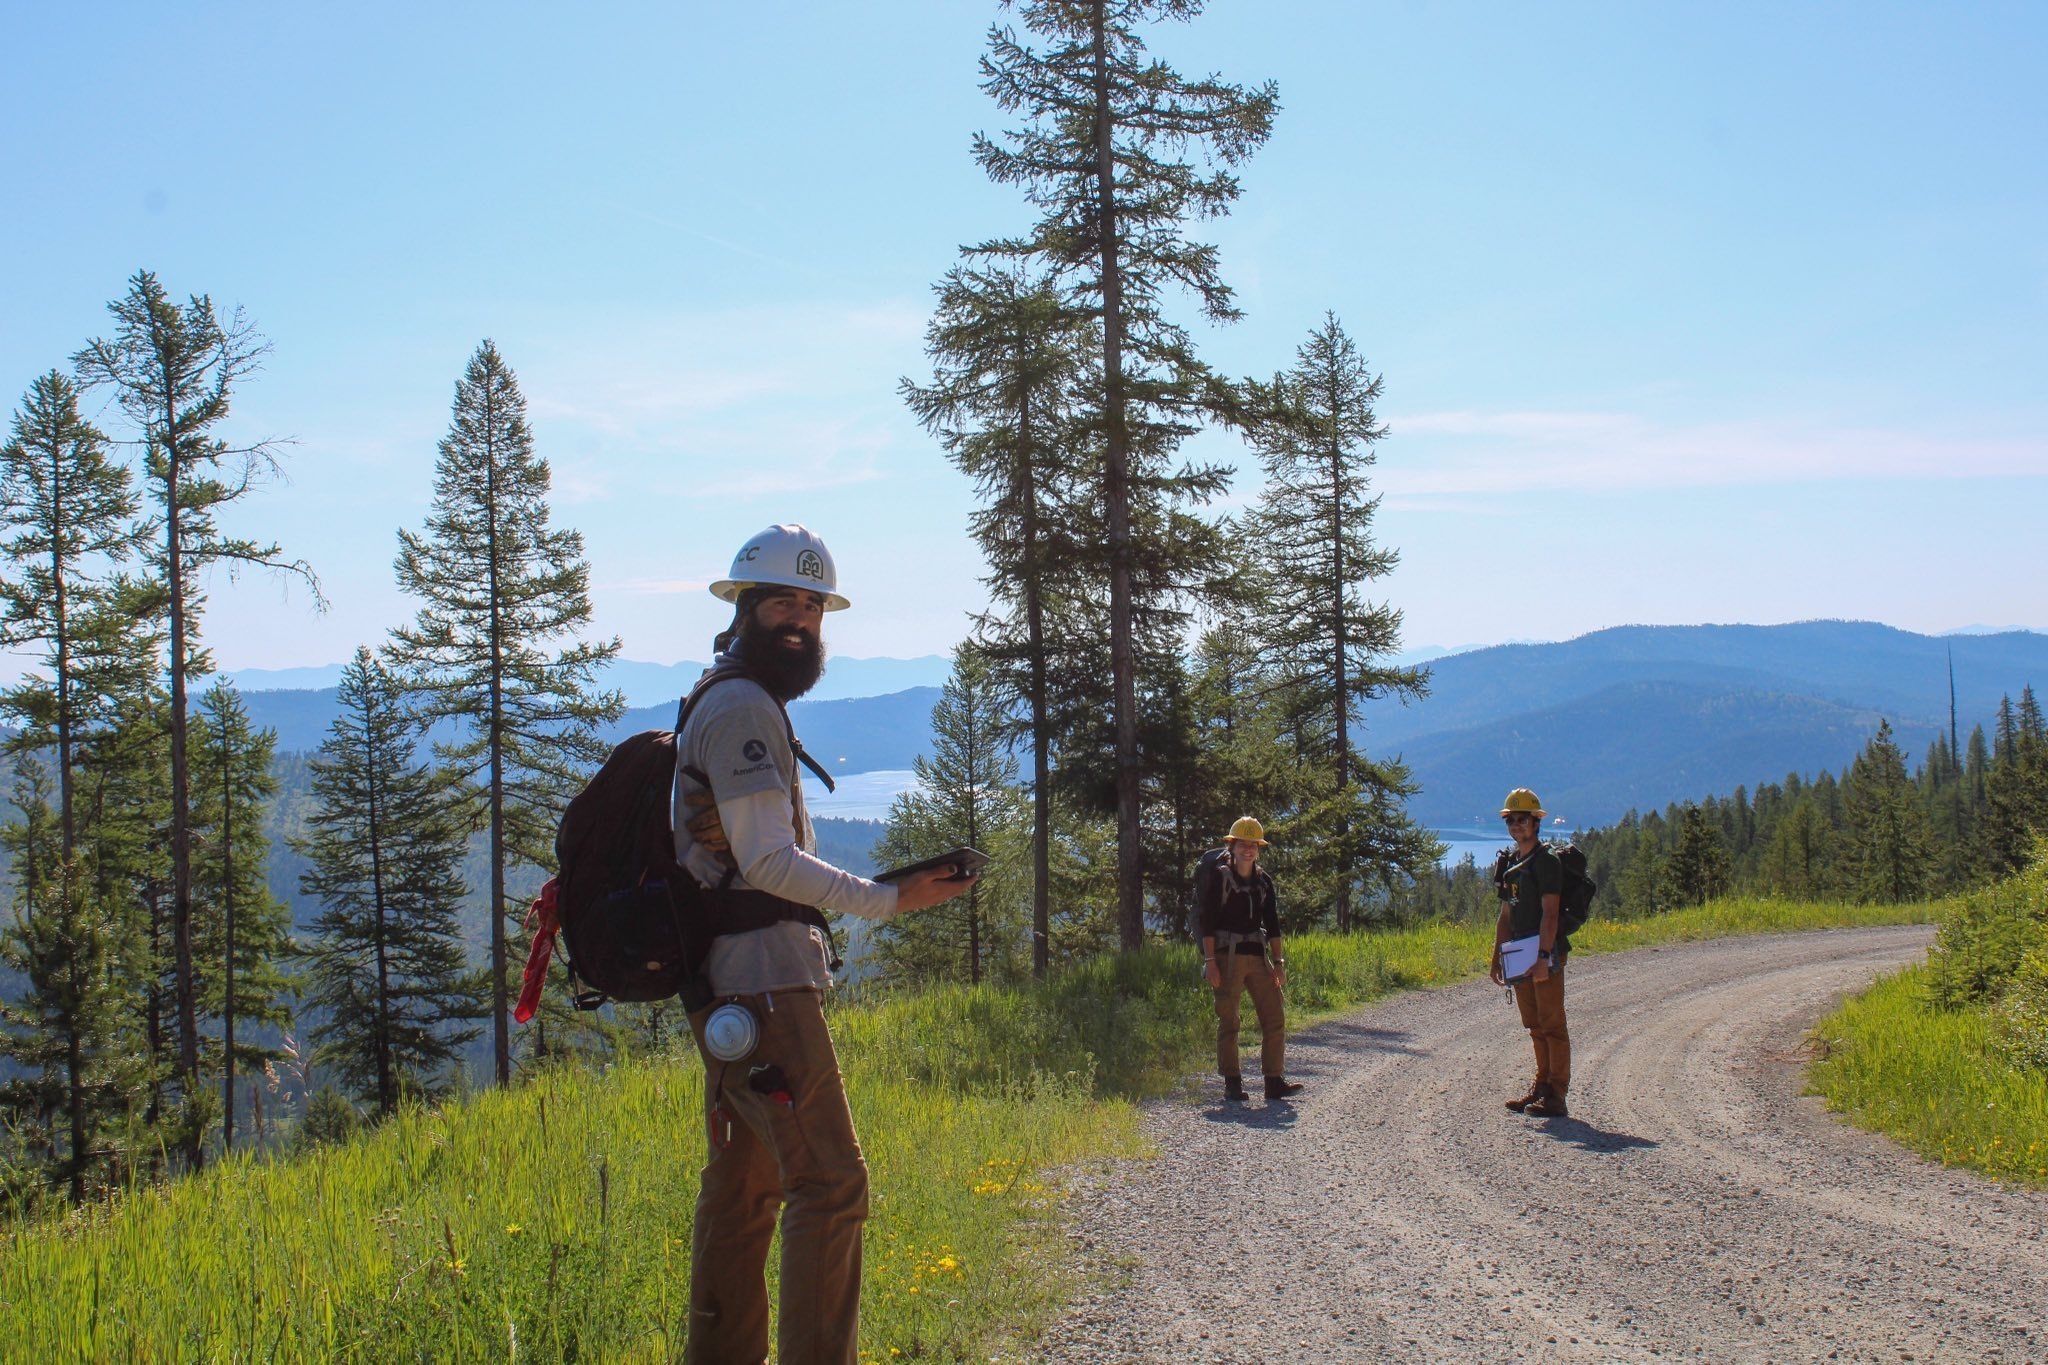 A crew leader wearing a white helmet stands in the foreground, on a gravel road that winds to the right. Two crew members stand further down the road. They are all smiling.